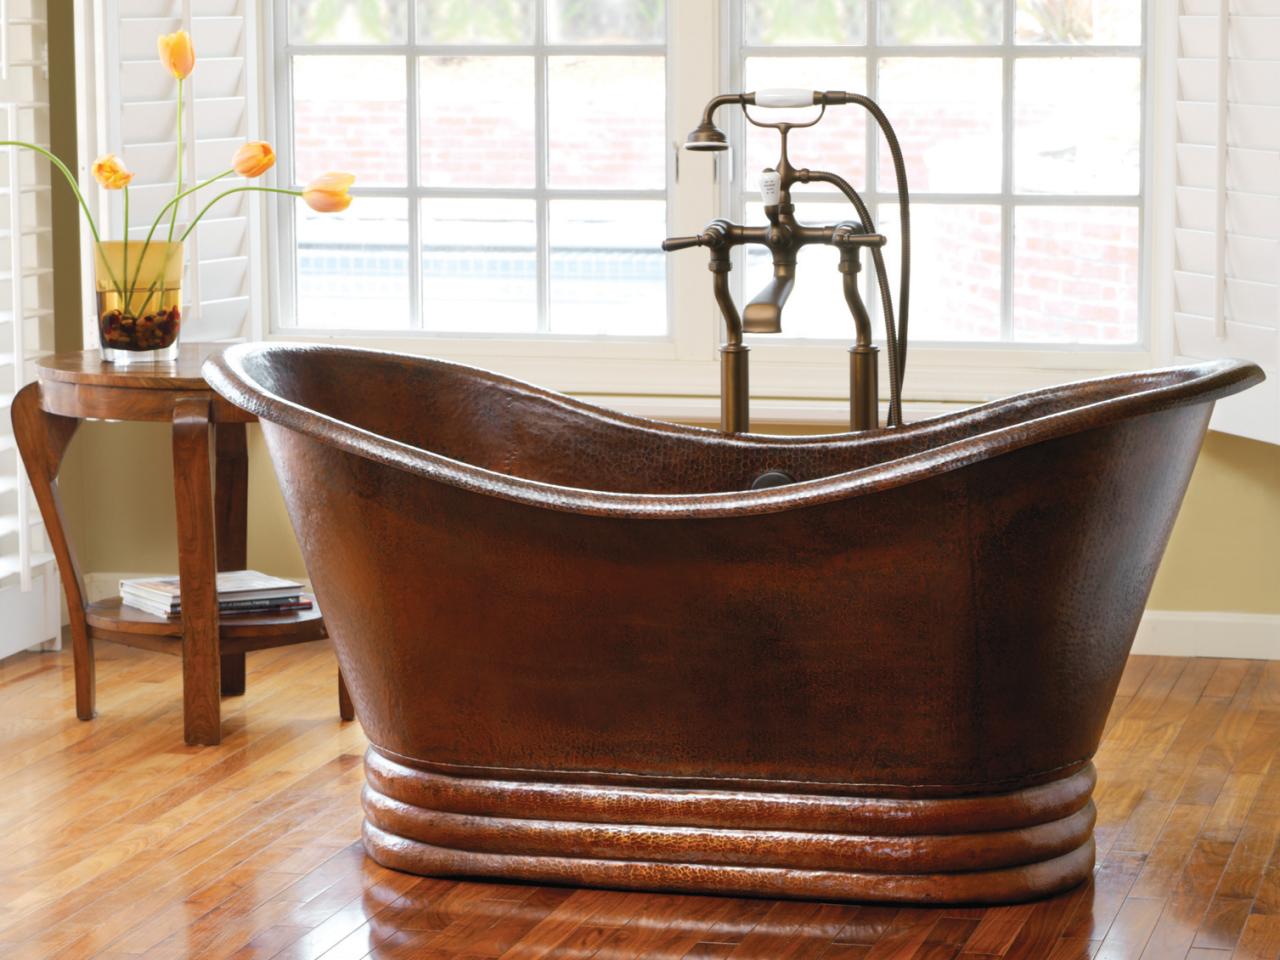 Refinishing Bathroom Fixtures, What Chemicals Are Used To Resurface Bathtubs